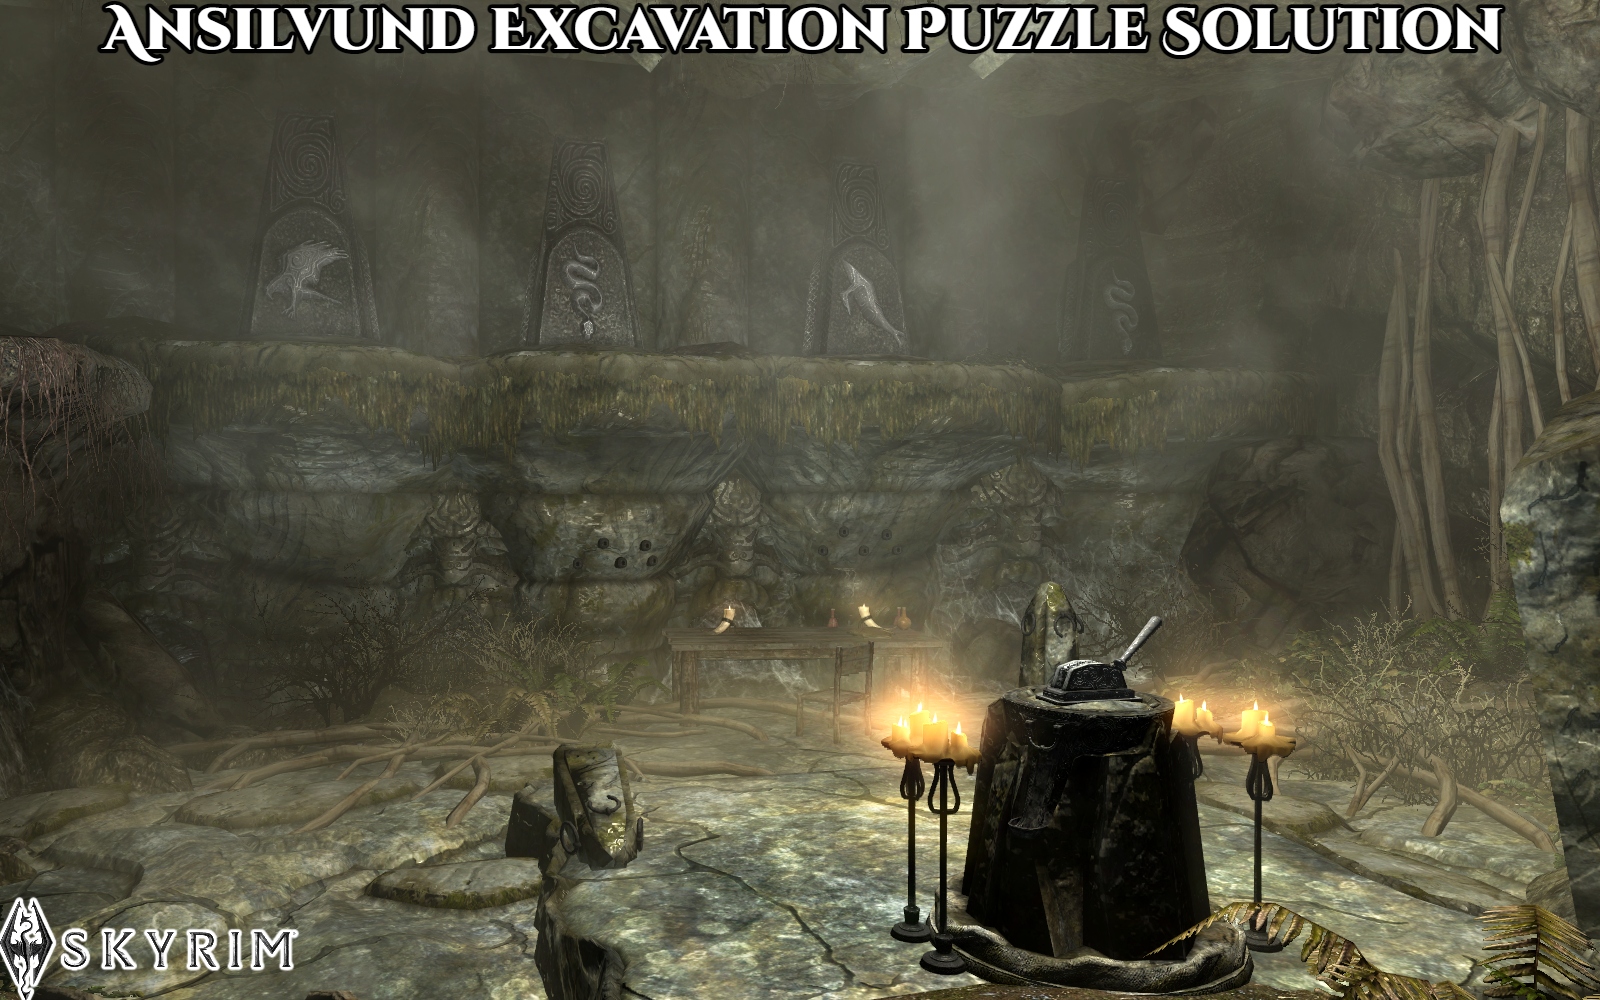 You are currently viewing Ansilvund Excavation Puzzle Solution In Skyrim